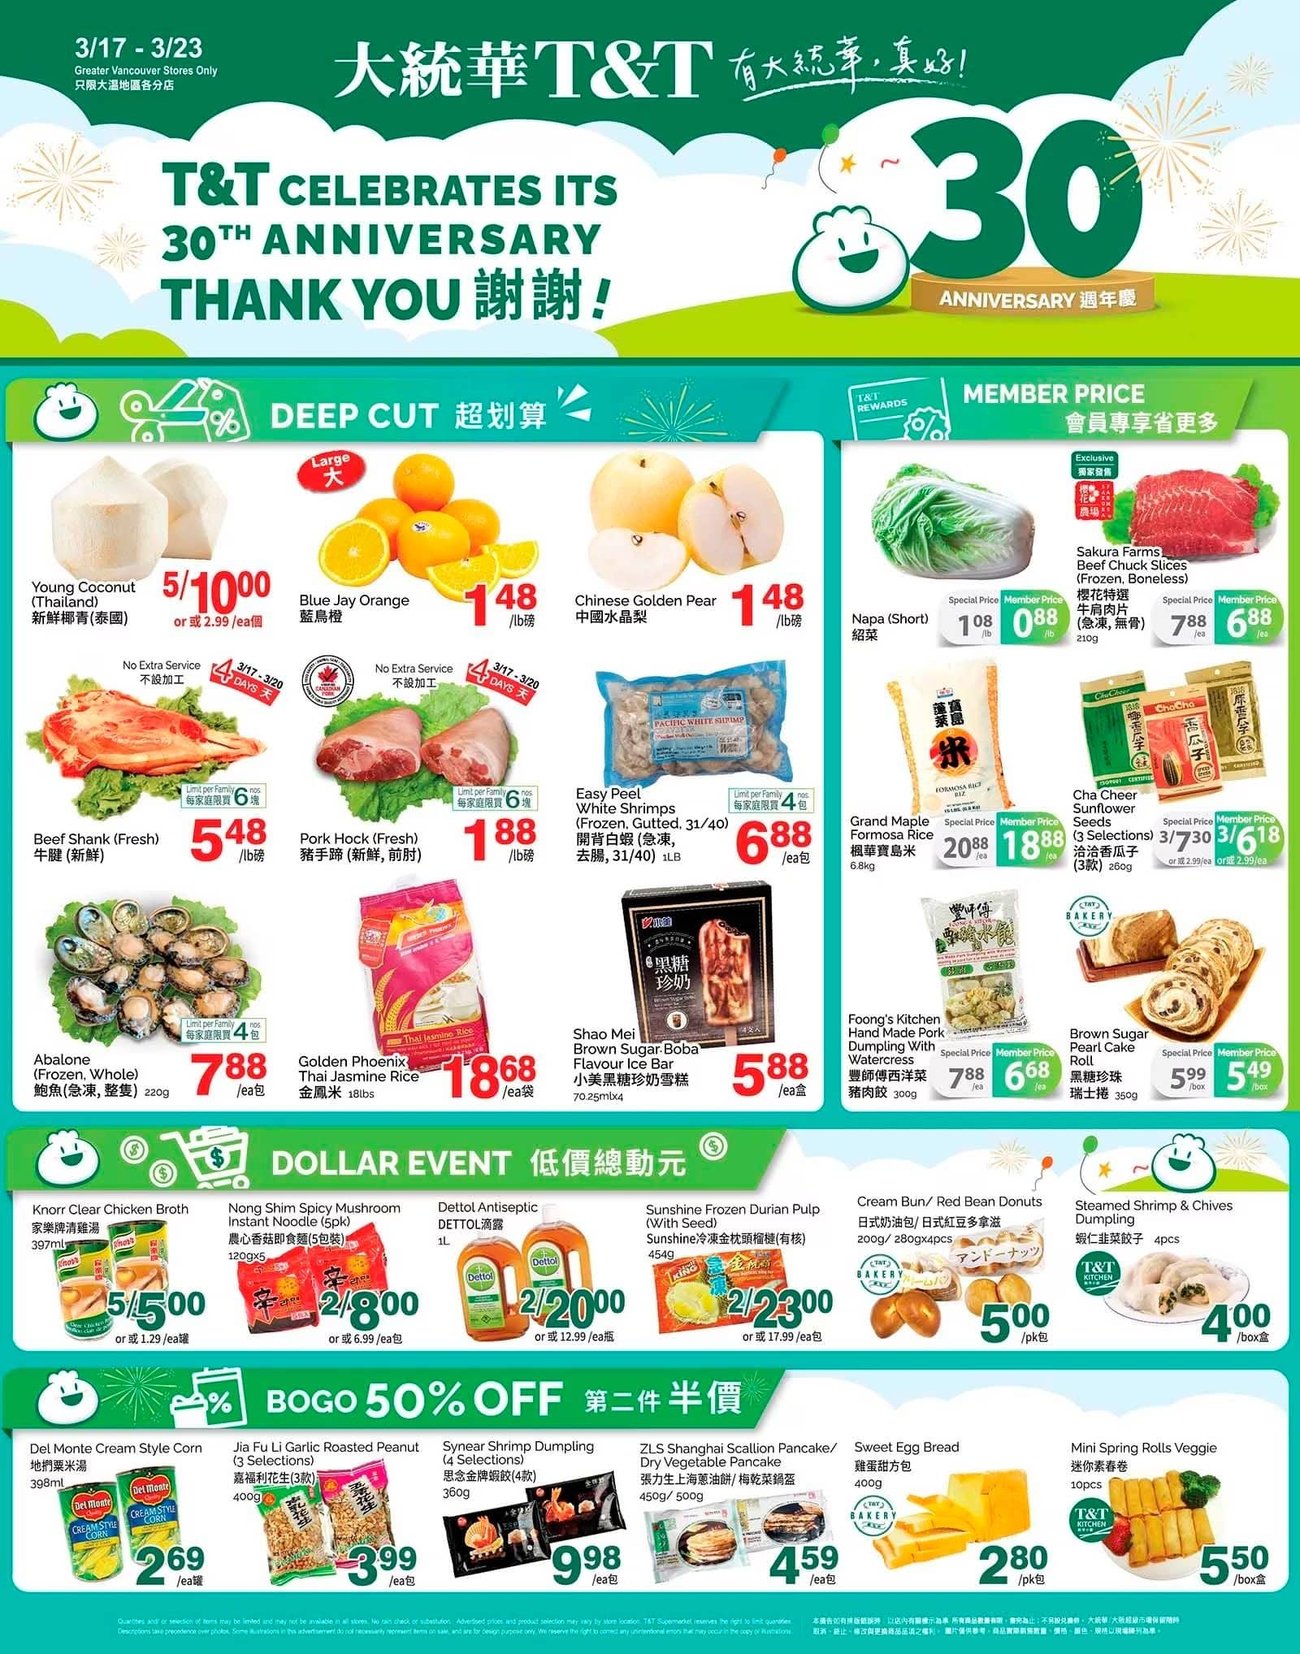 T & T Supermarket - British Columbia - Weekly Flyer Specials - Page 1